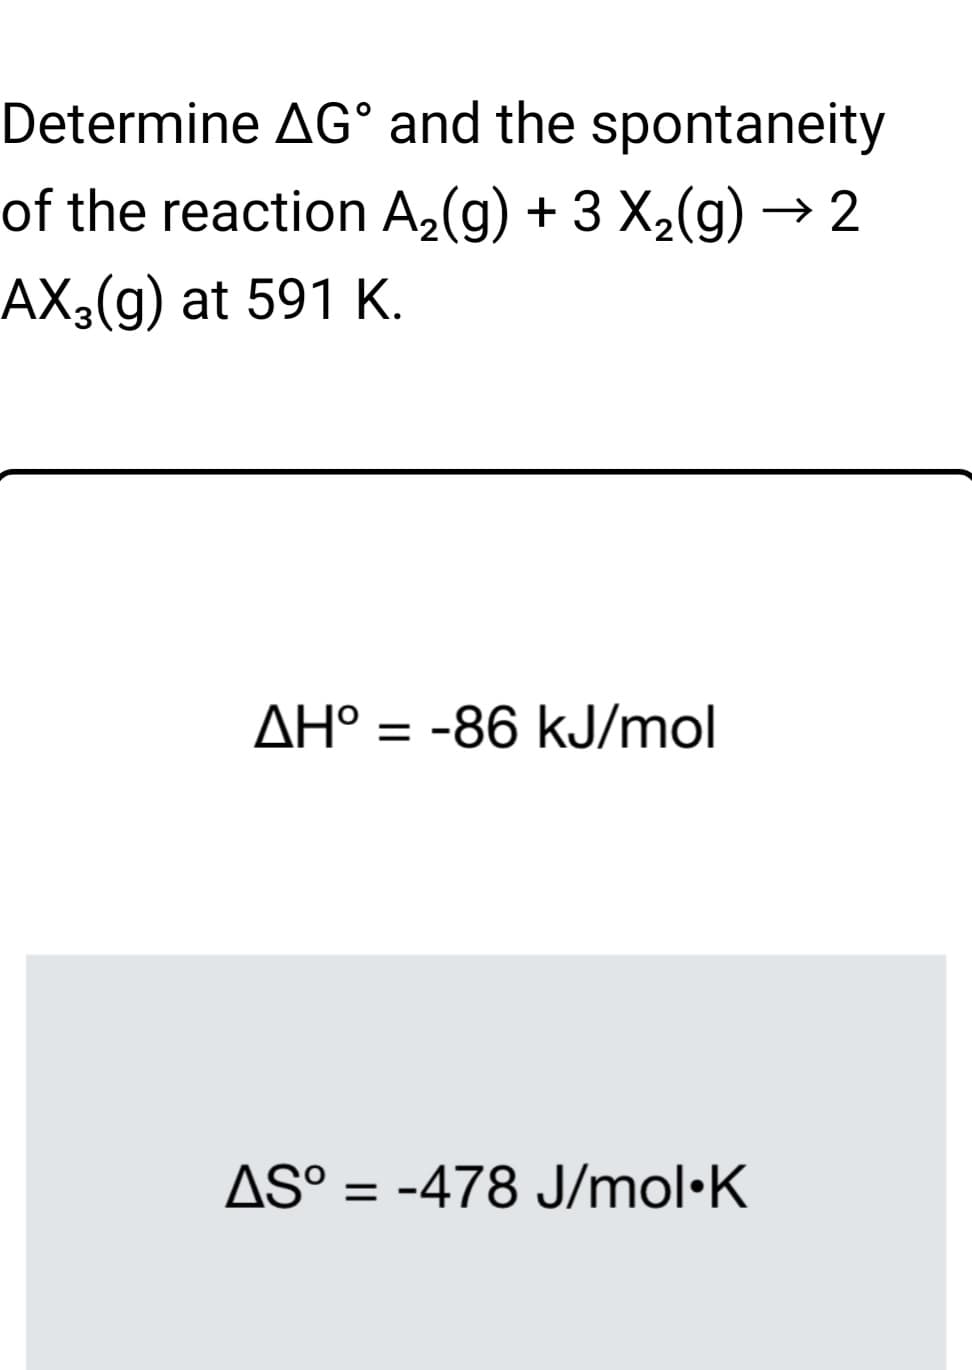 Determine AG° and the spontaneity
of the reaction A2(g) + 3 X2(g) → 2
AX3(g) at 591 K.
AH° = -86 kJ/mol
AS° = -478 J/mol·K
